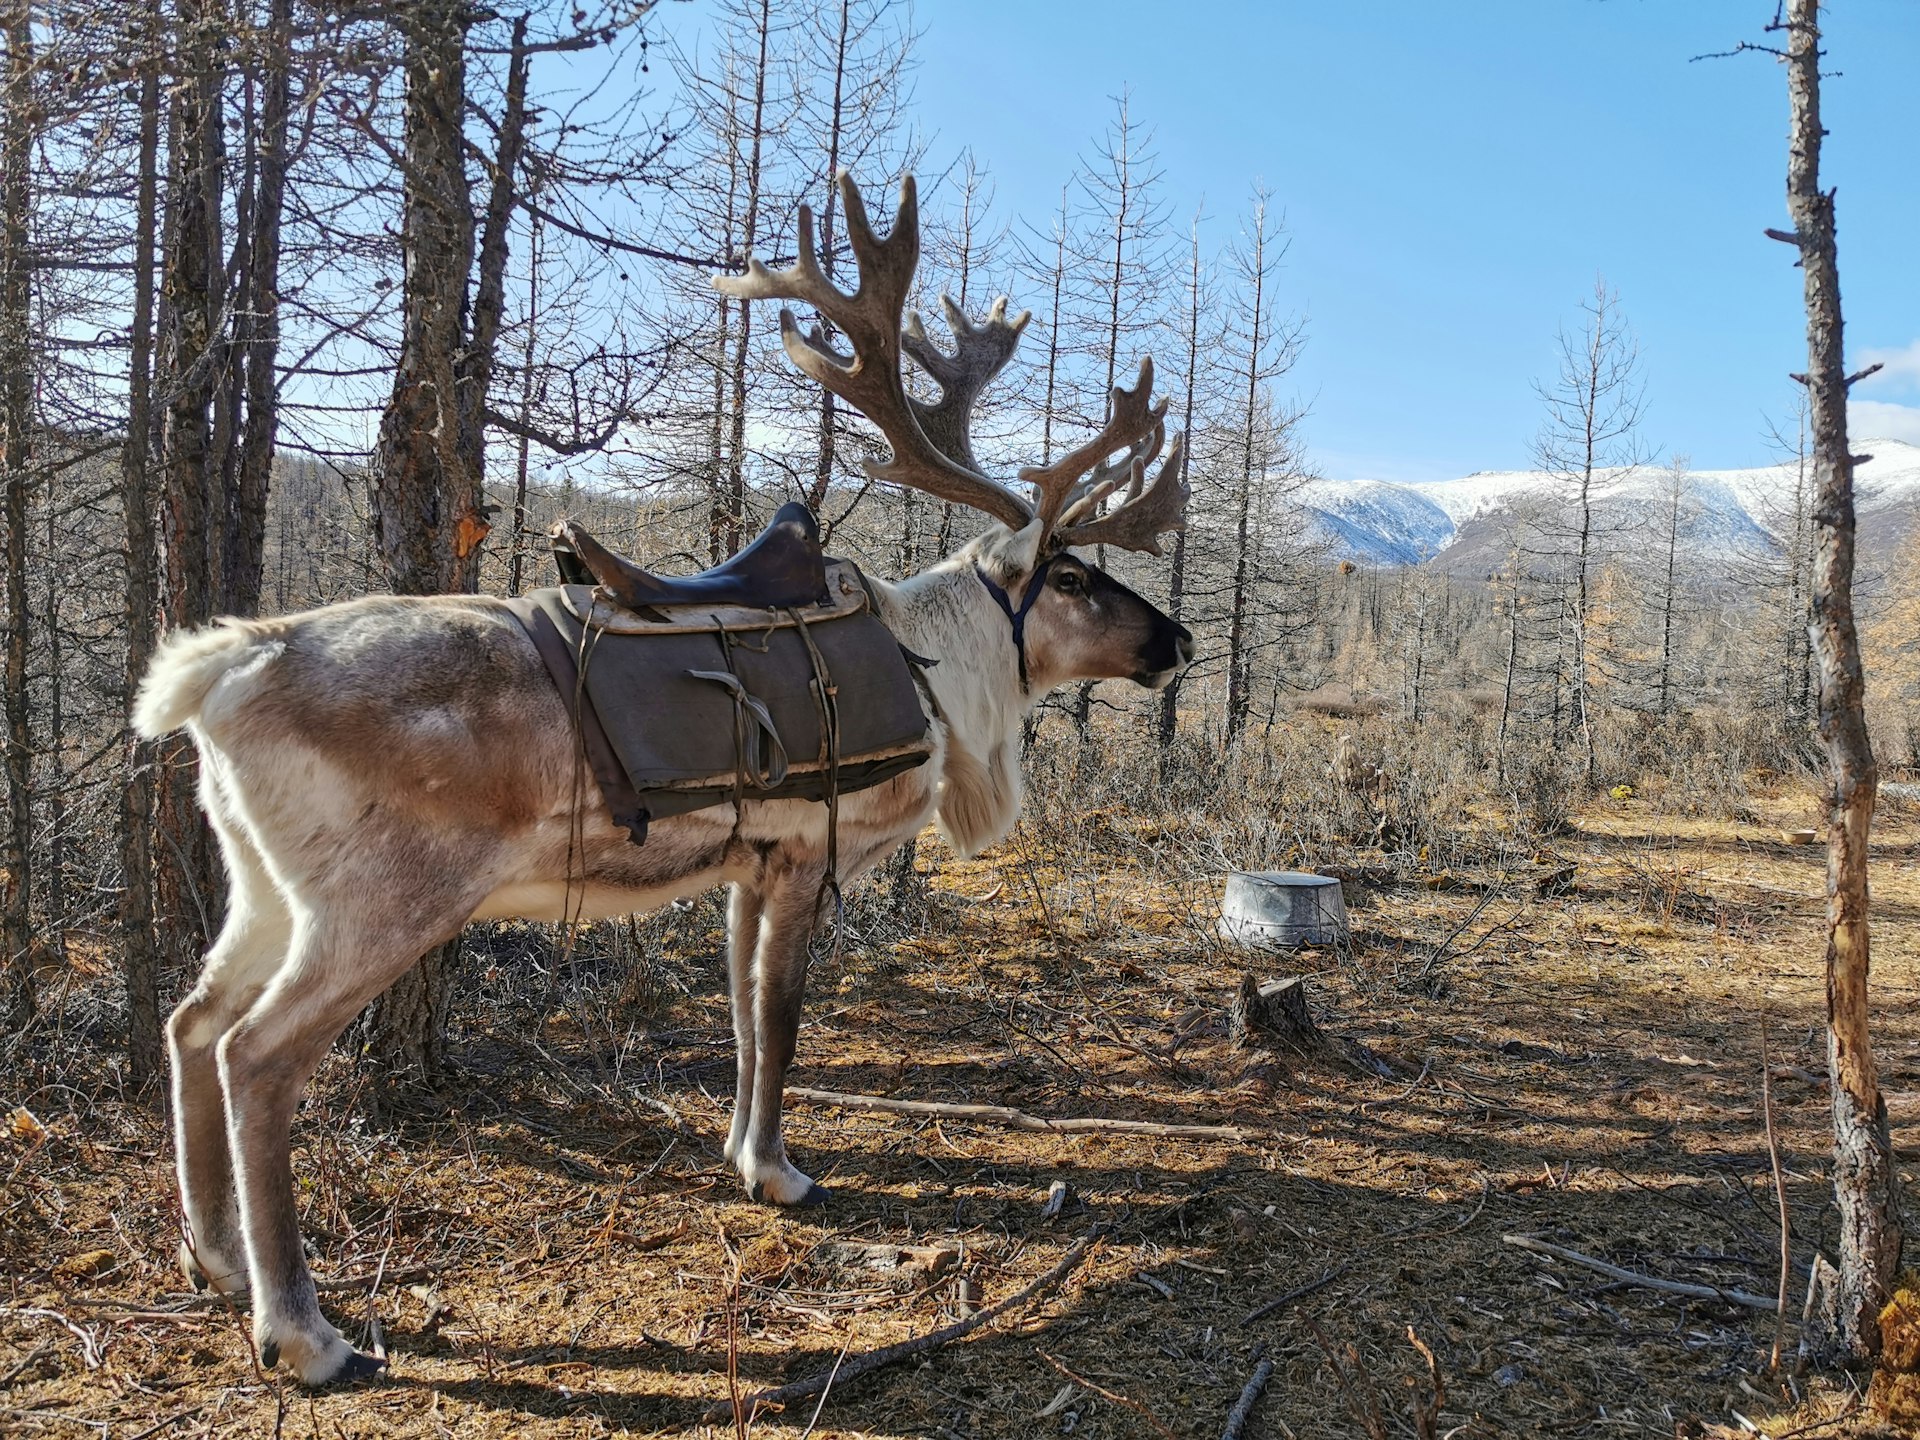 A reindeer with a saddle stands before bare trees, with snow-capped mountains in the background.